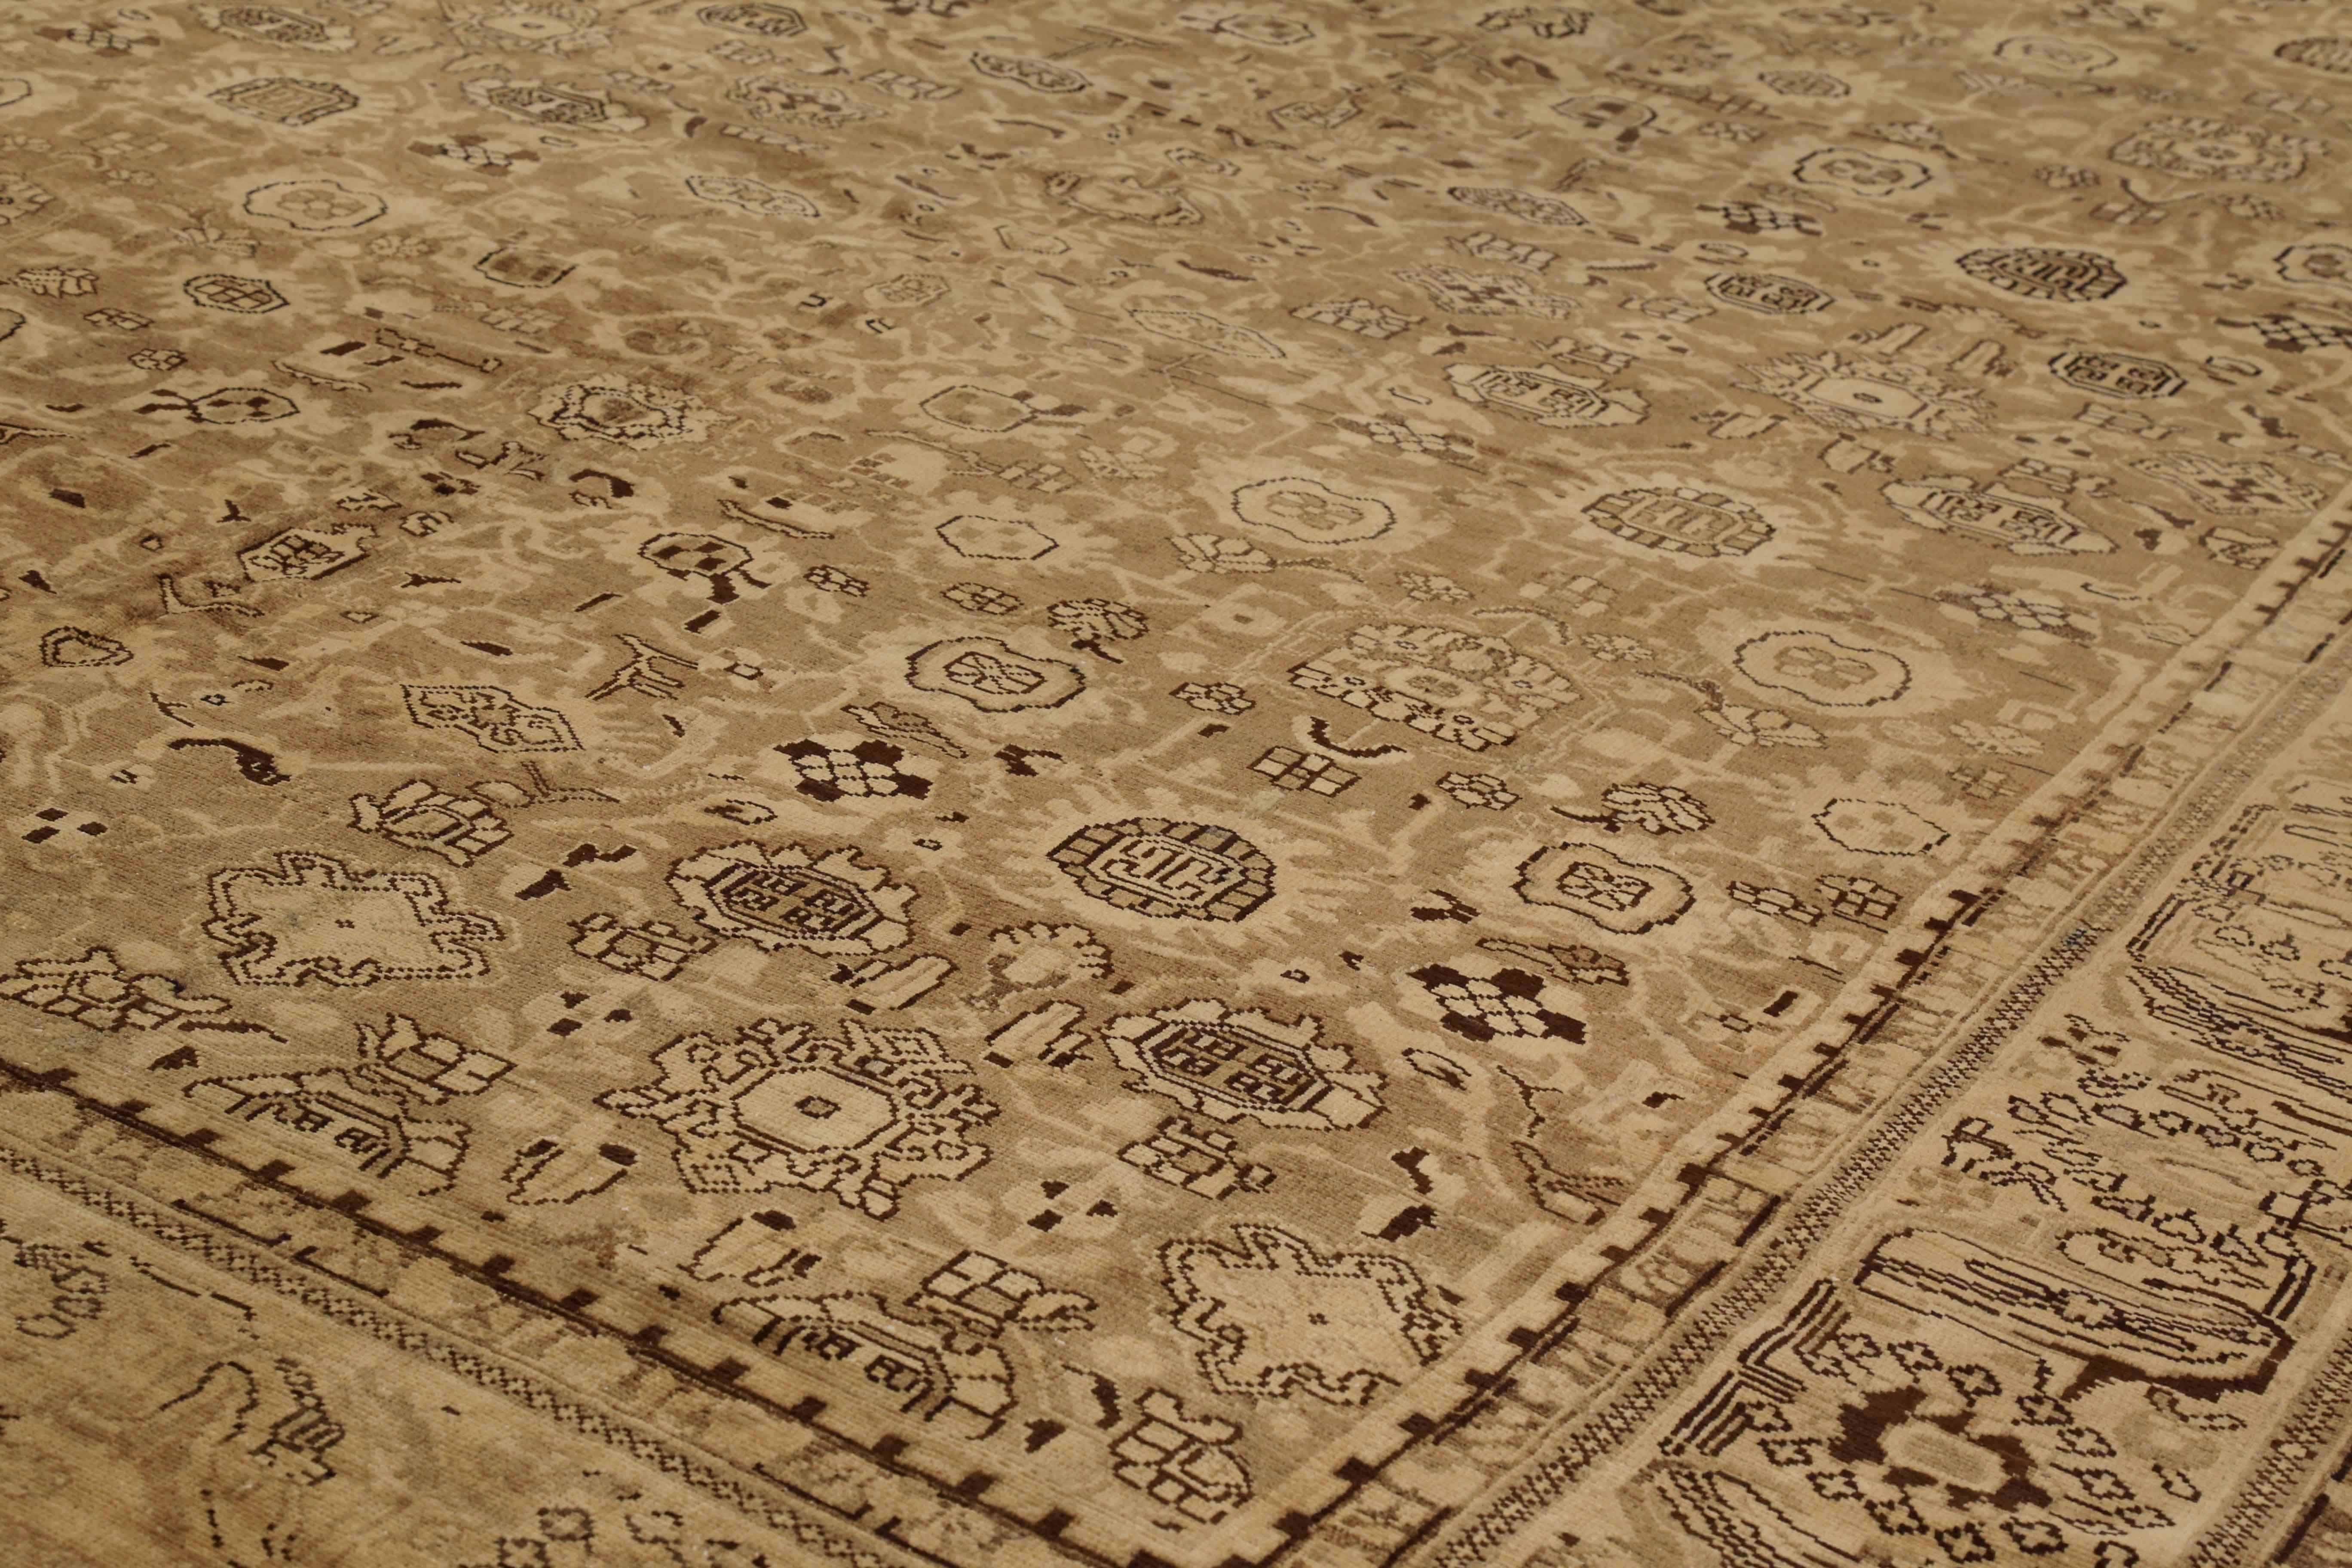 Hand-Woven Antique Persian Area Rug Malayer Design For Sale